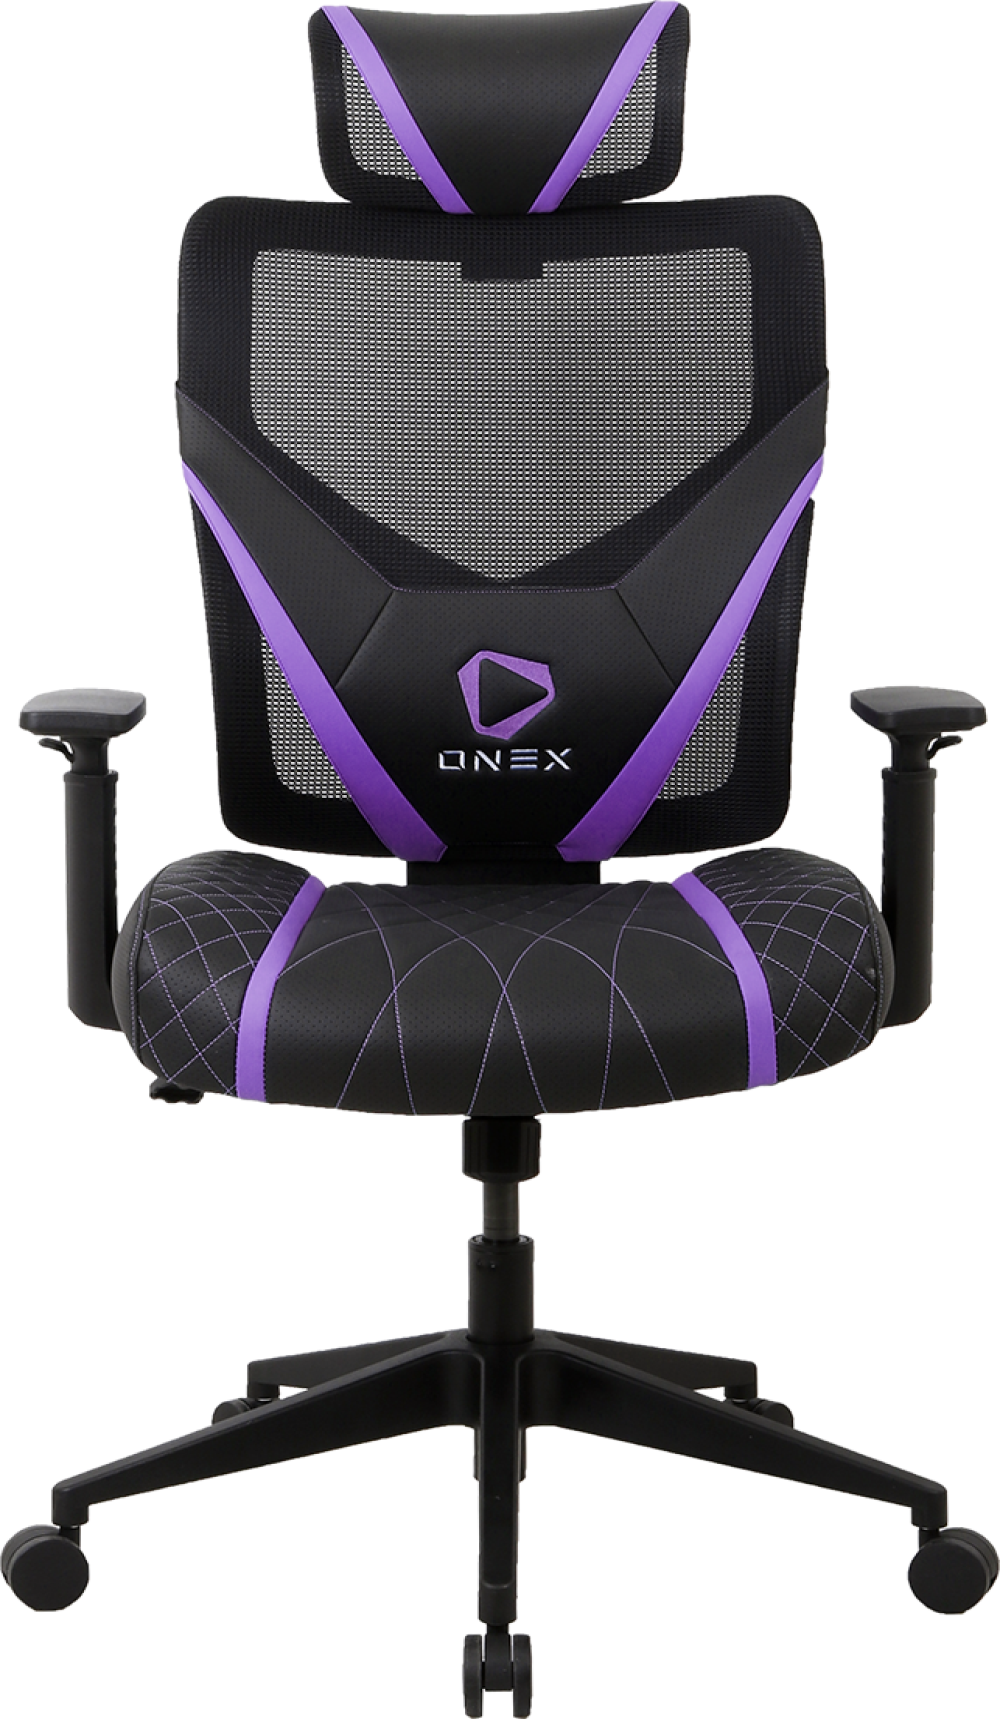  ONEX GE300 Gaming /Office Chair - Black/Violet<BR><fONT COLOR='RED'>In-Store Pickup Not Available - Delivery Only (Freight Charges Apply)  